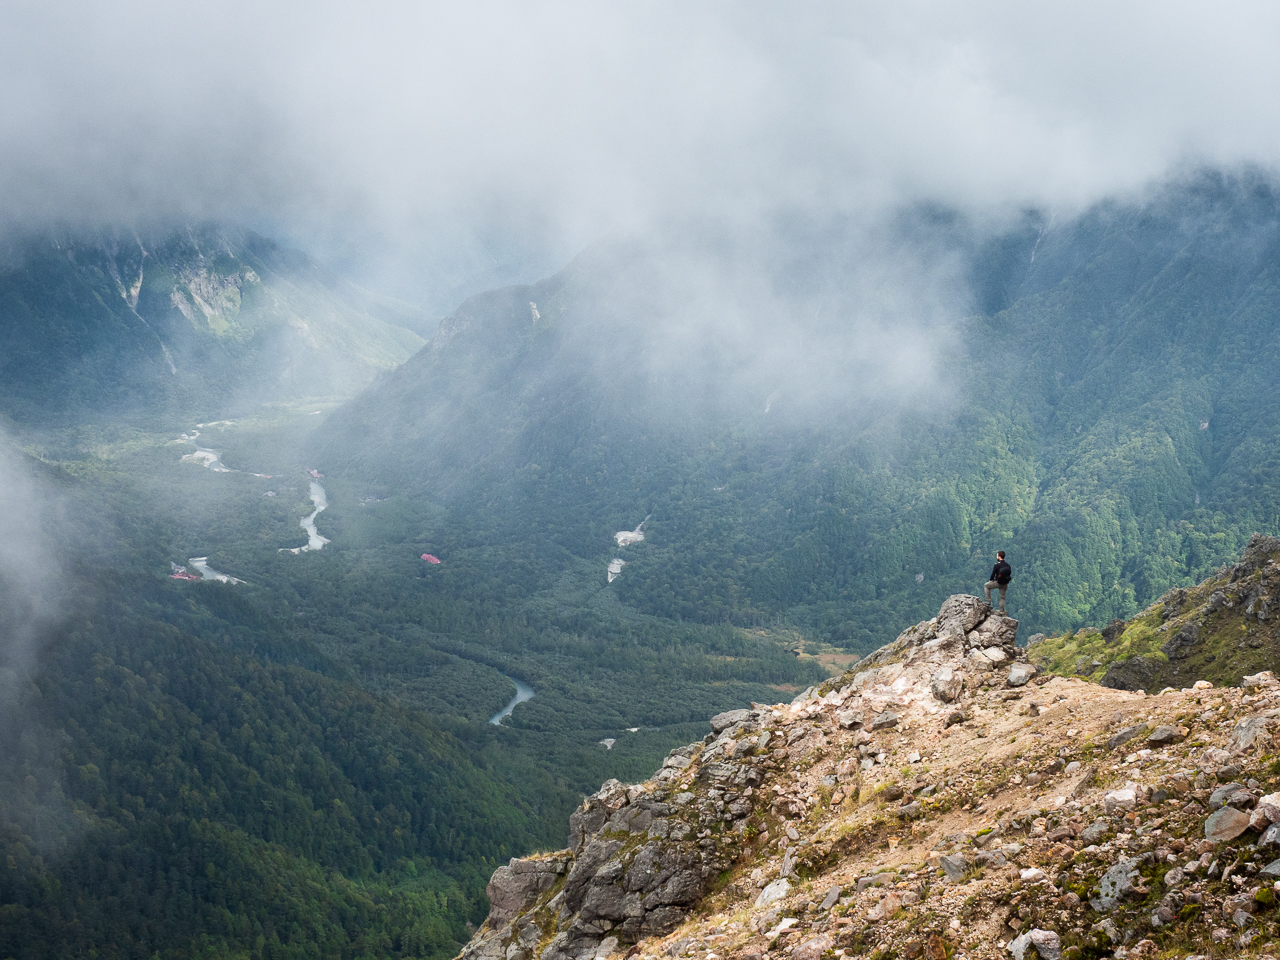 A hiker stands on a cloudy precipice on Mount Yake, a volcano in Kamikōchi (the Upper Highlands) in the Hida Mountains, Nagano Prefecture, Japan.